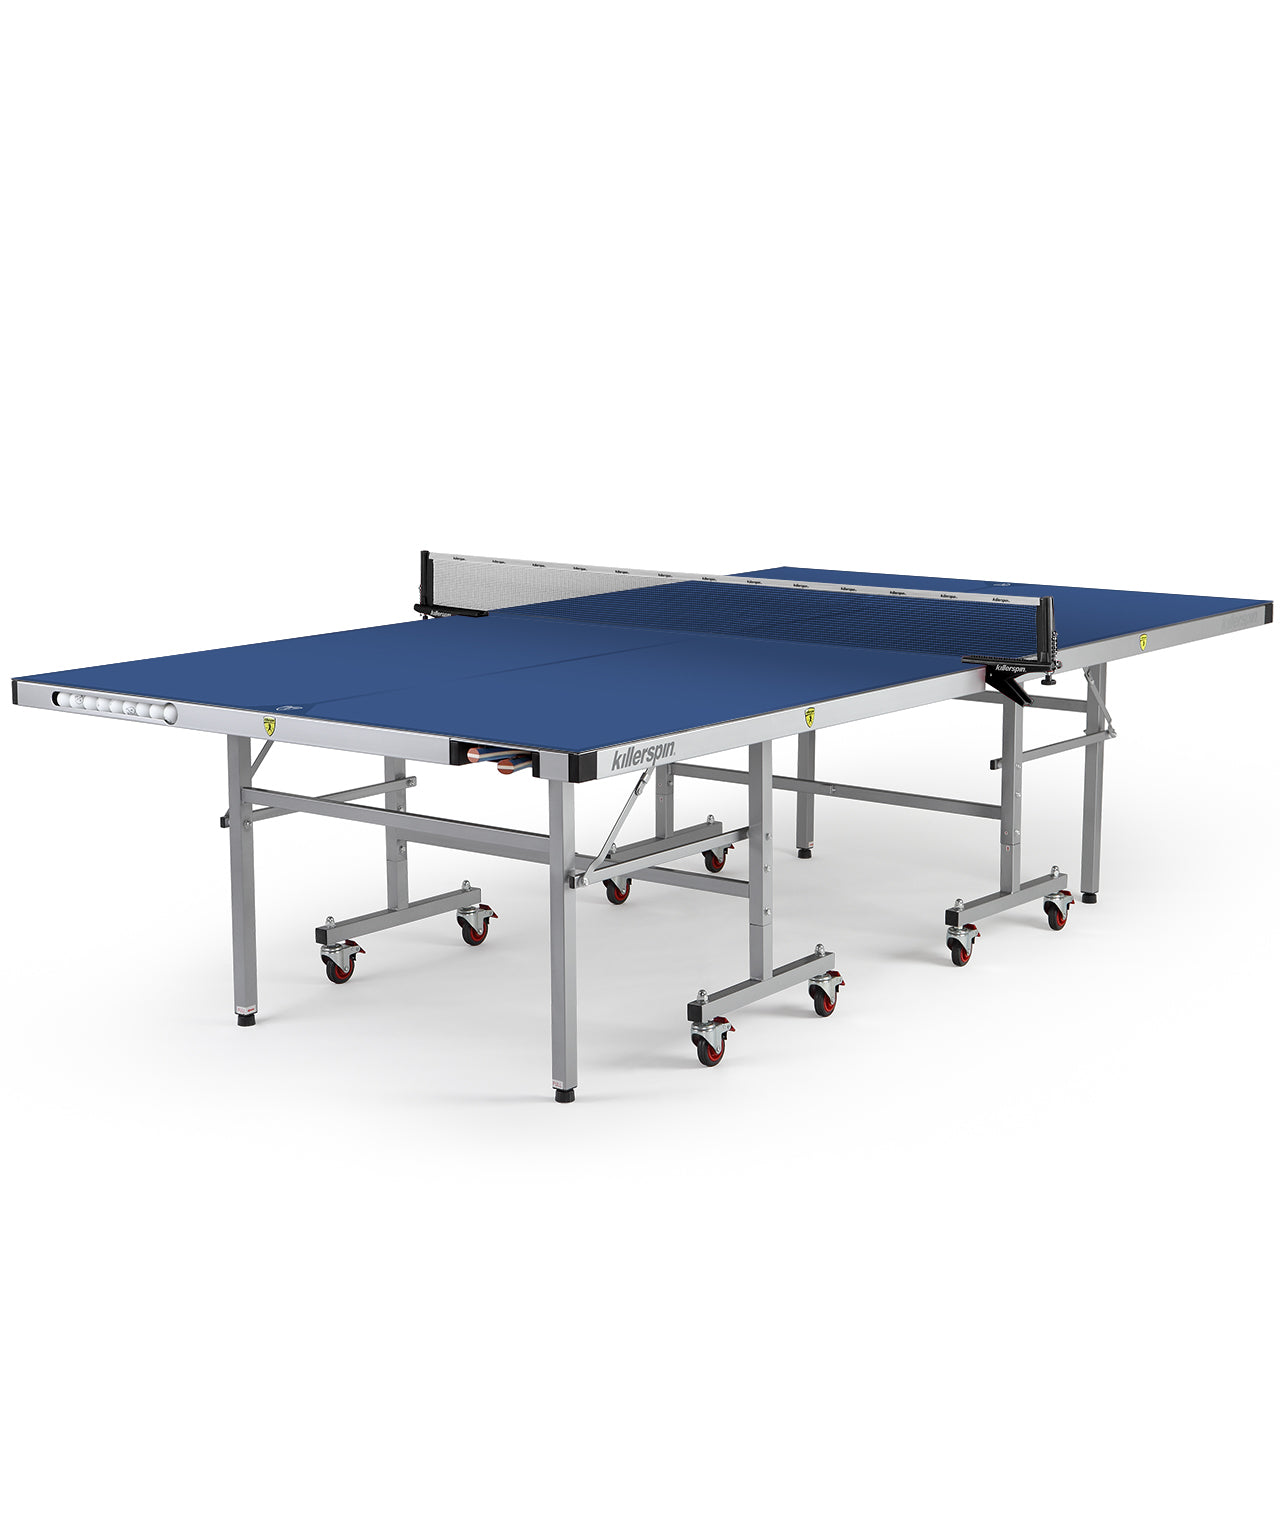 Blue C5 Beer Pong Table